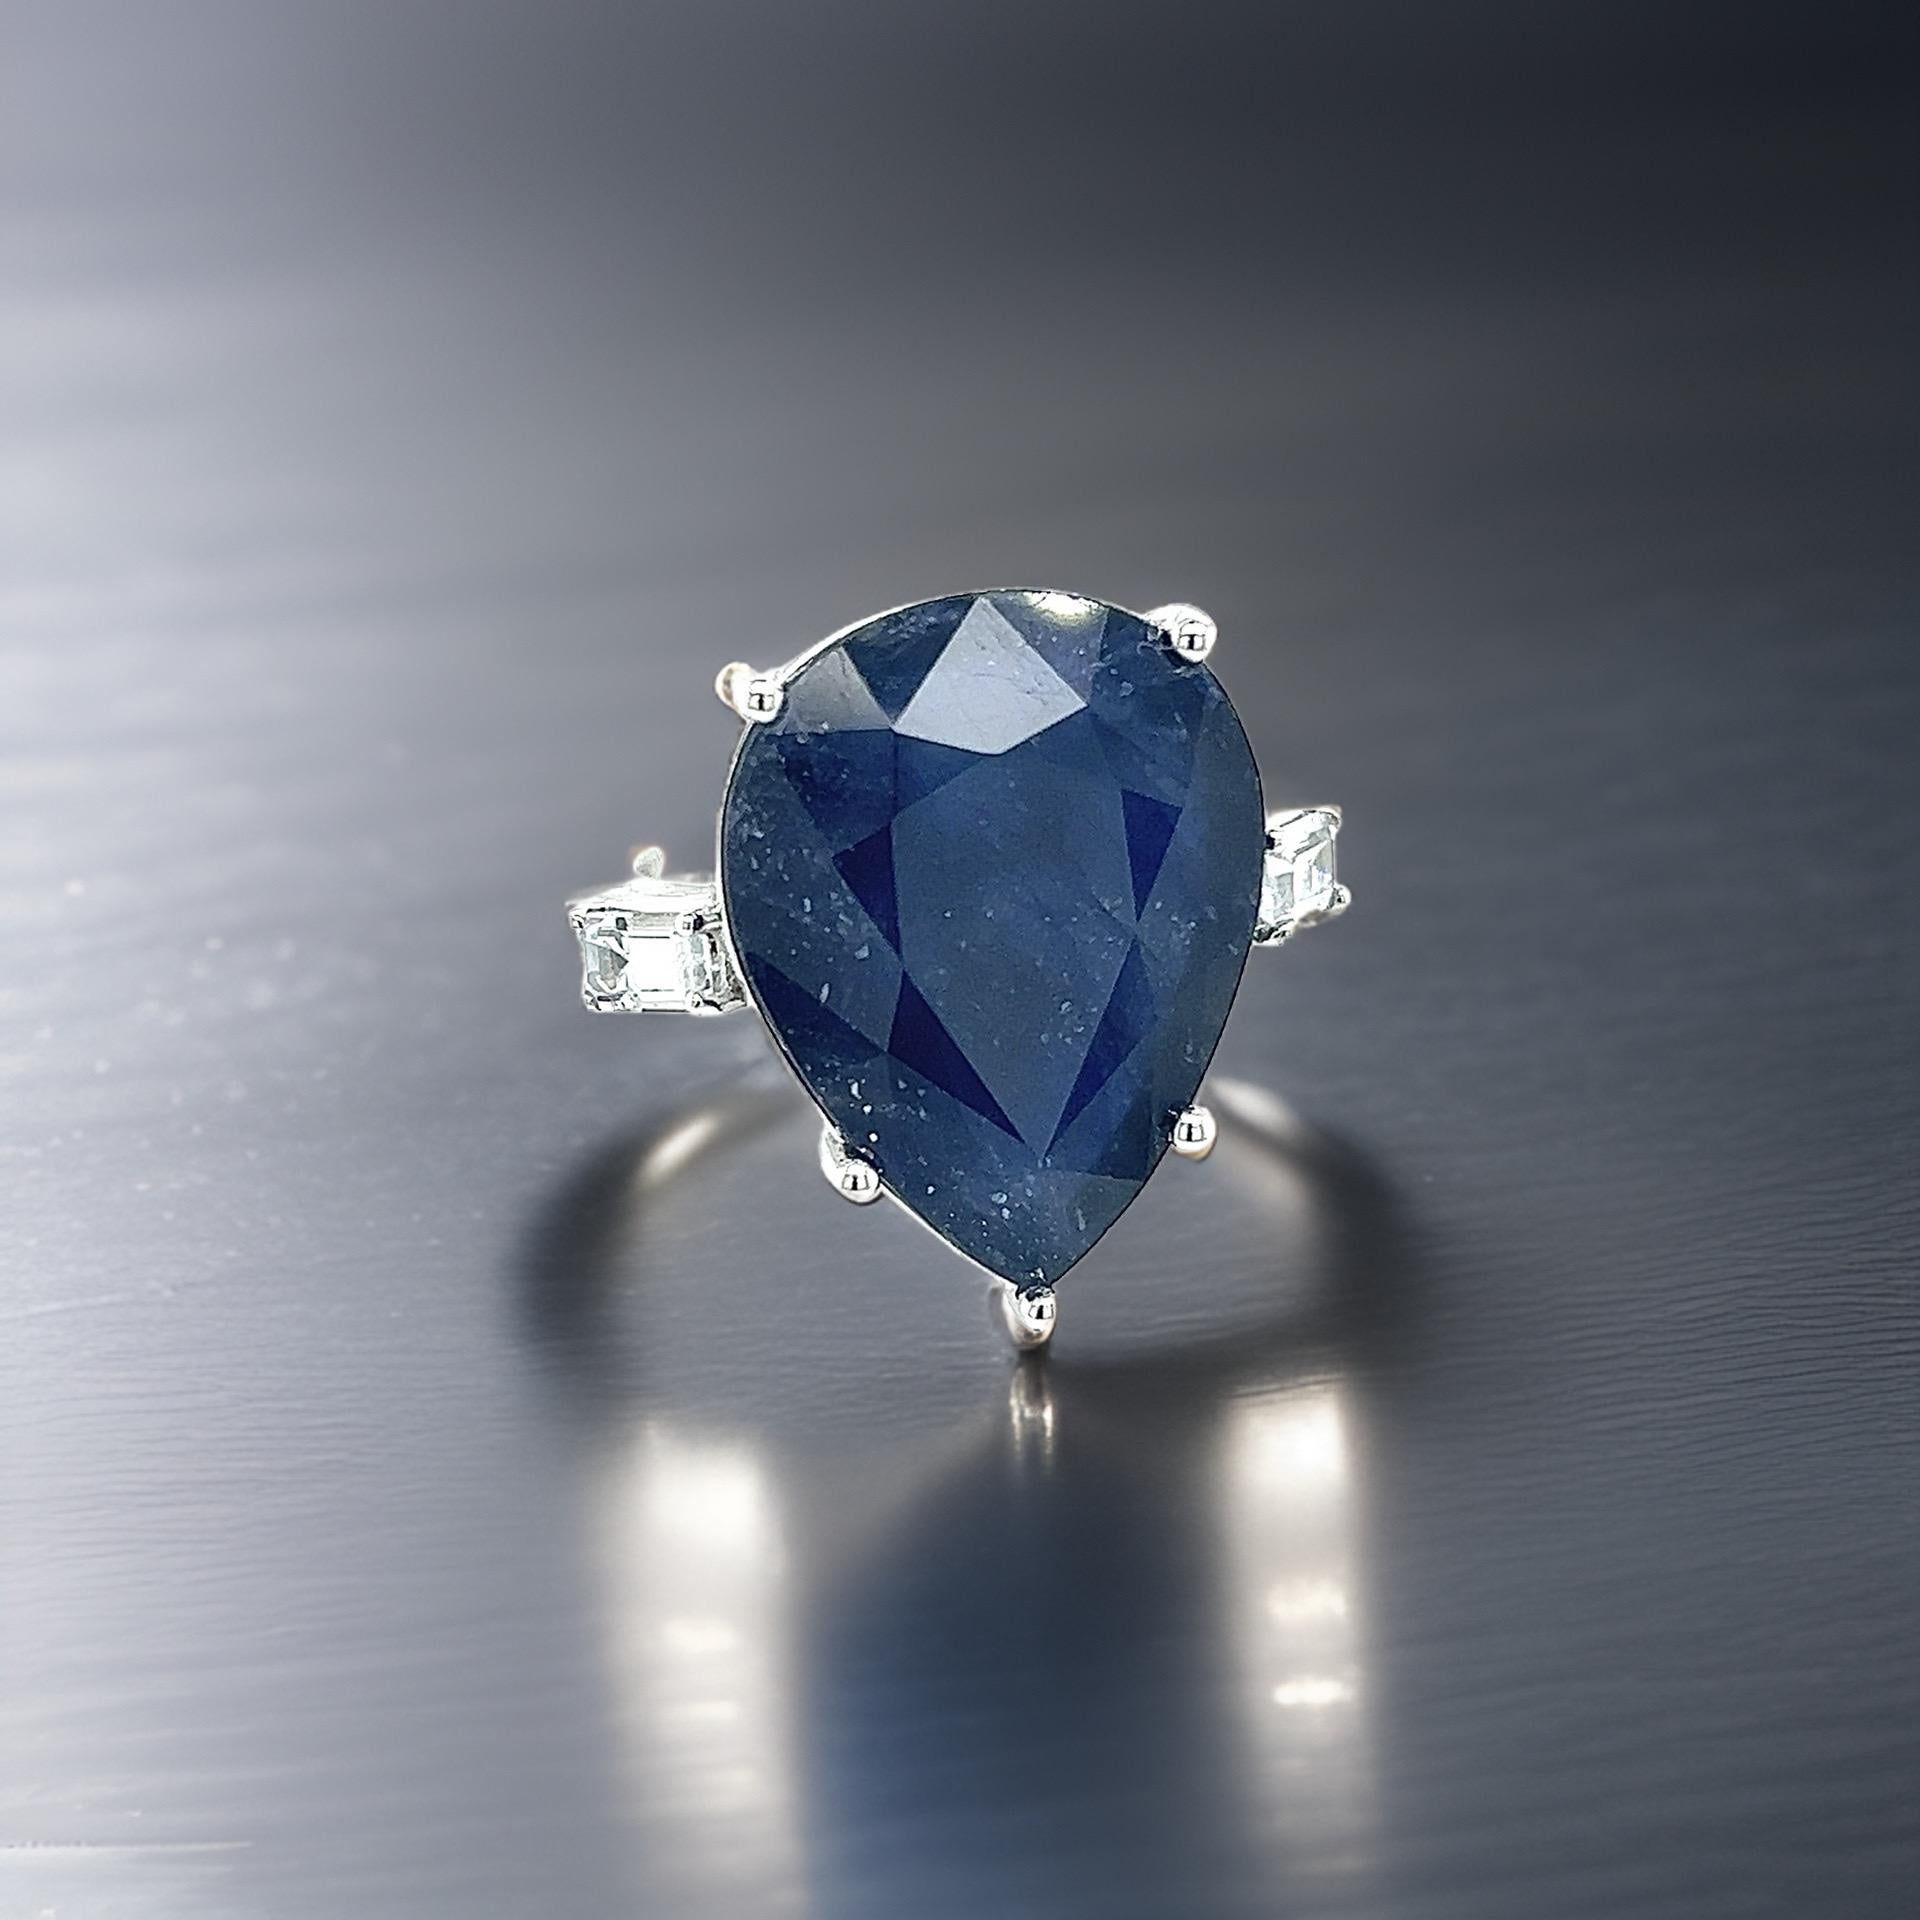 Pear Cut Natural Sapphire Diamond Ring Size 6.5 14k W Gold 17.73 TCW Certified For Sale